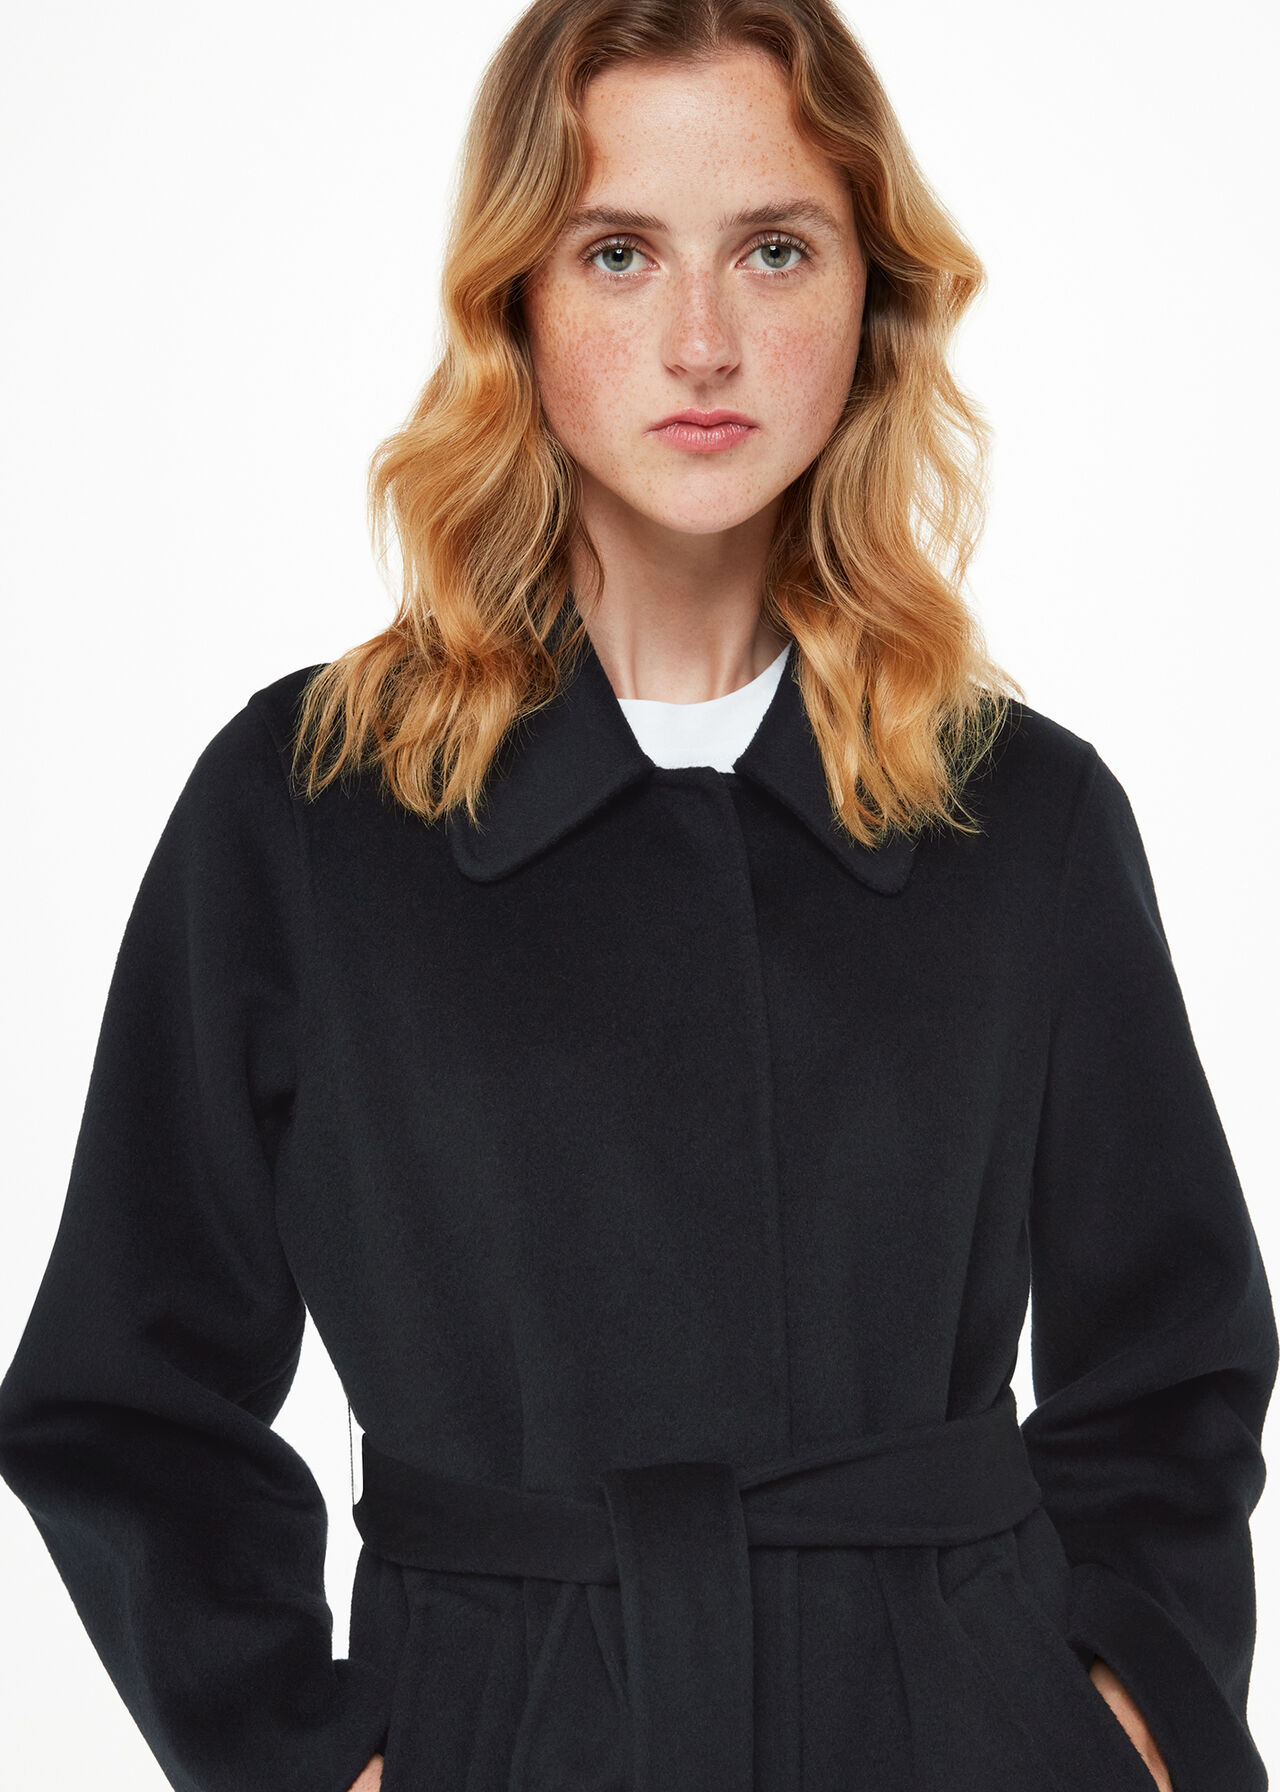 Nell Belted Doubled Faced Coat